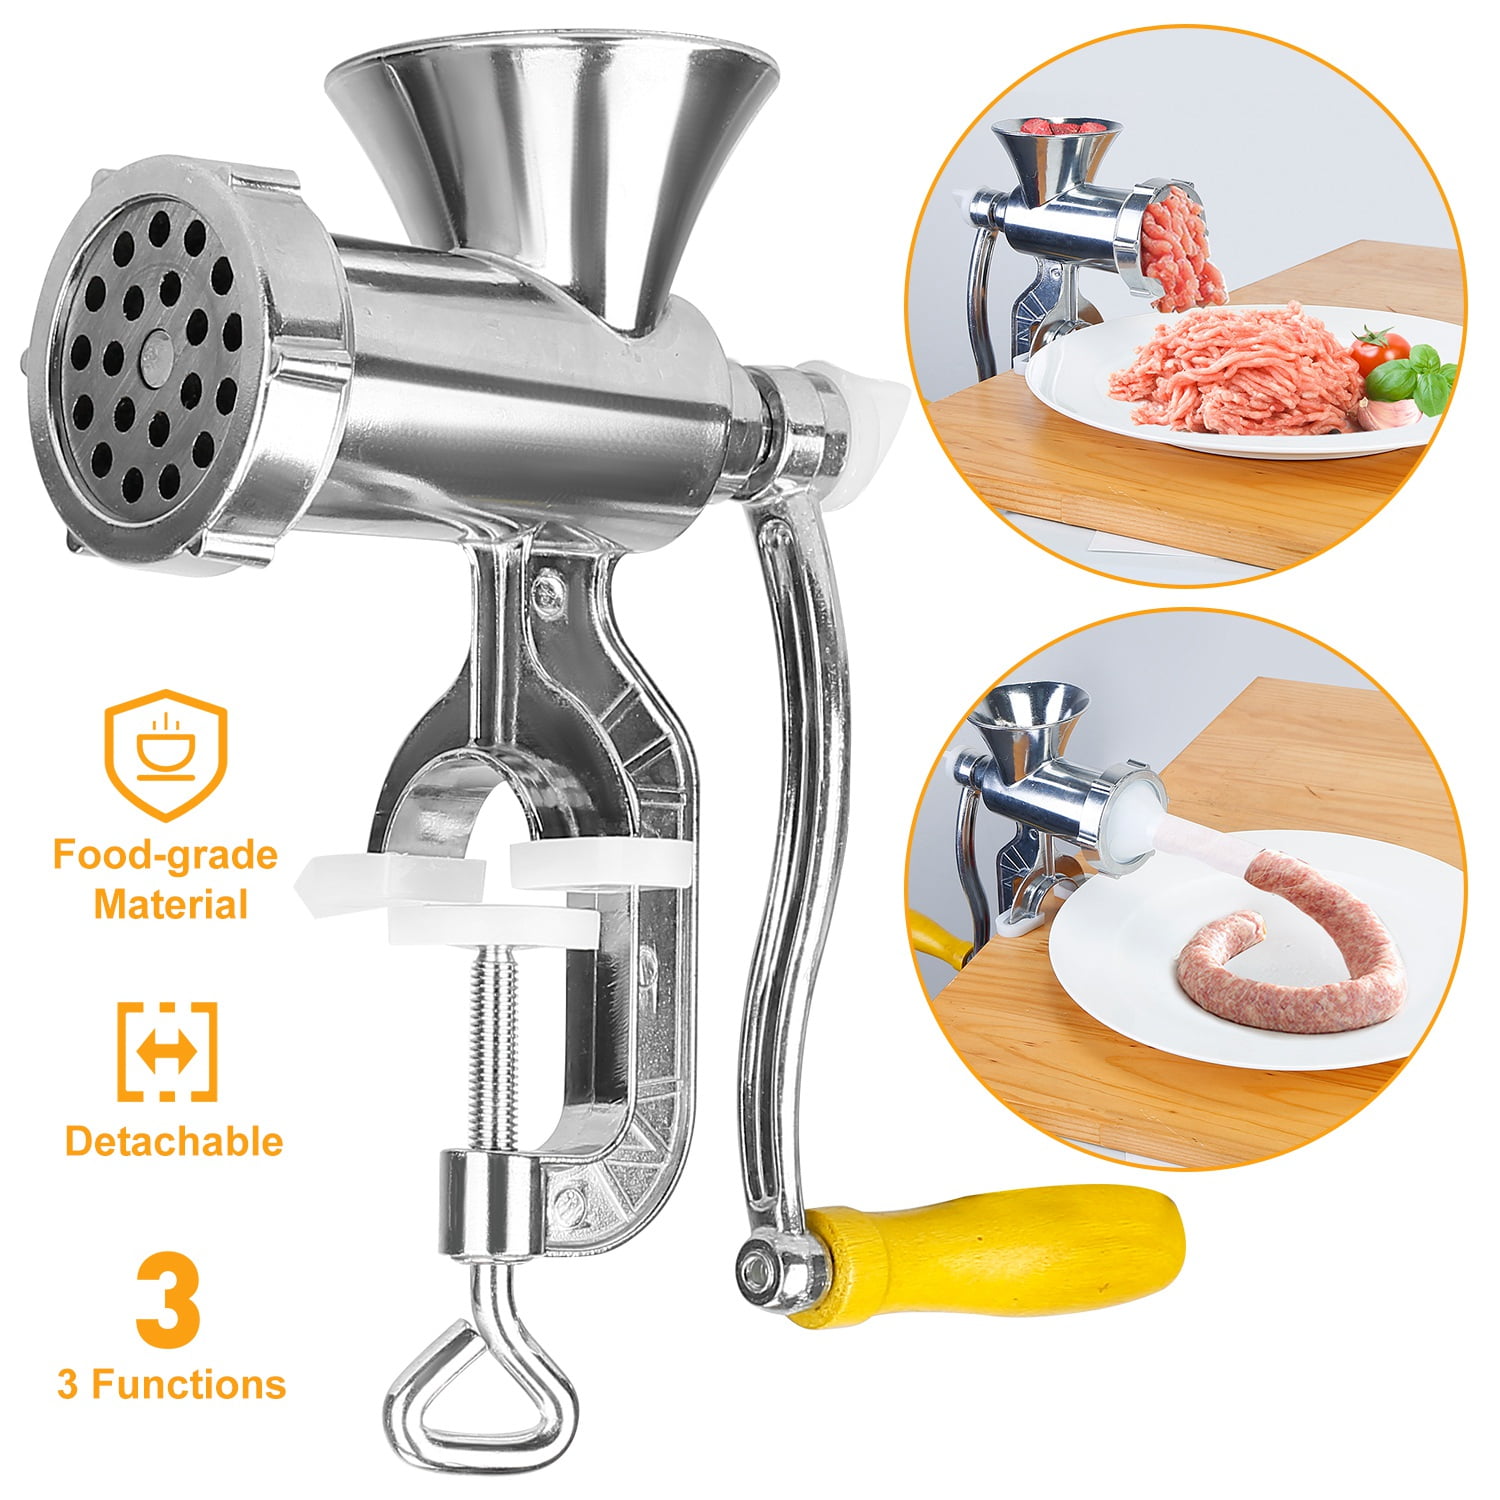  KitchenCraft Meat Mincer in Gift Box, Home Made No. 8, Manual  Mincer, Cast Iron, 28 x 24 x 9cm : Home & Kitchen